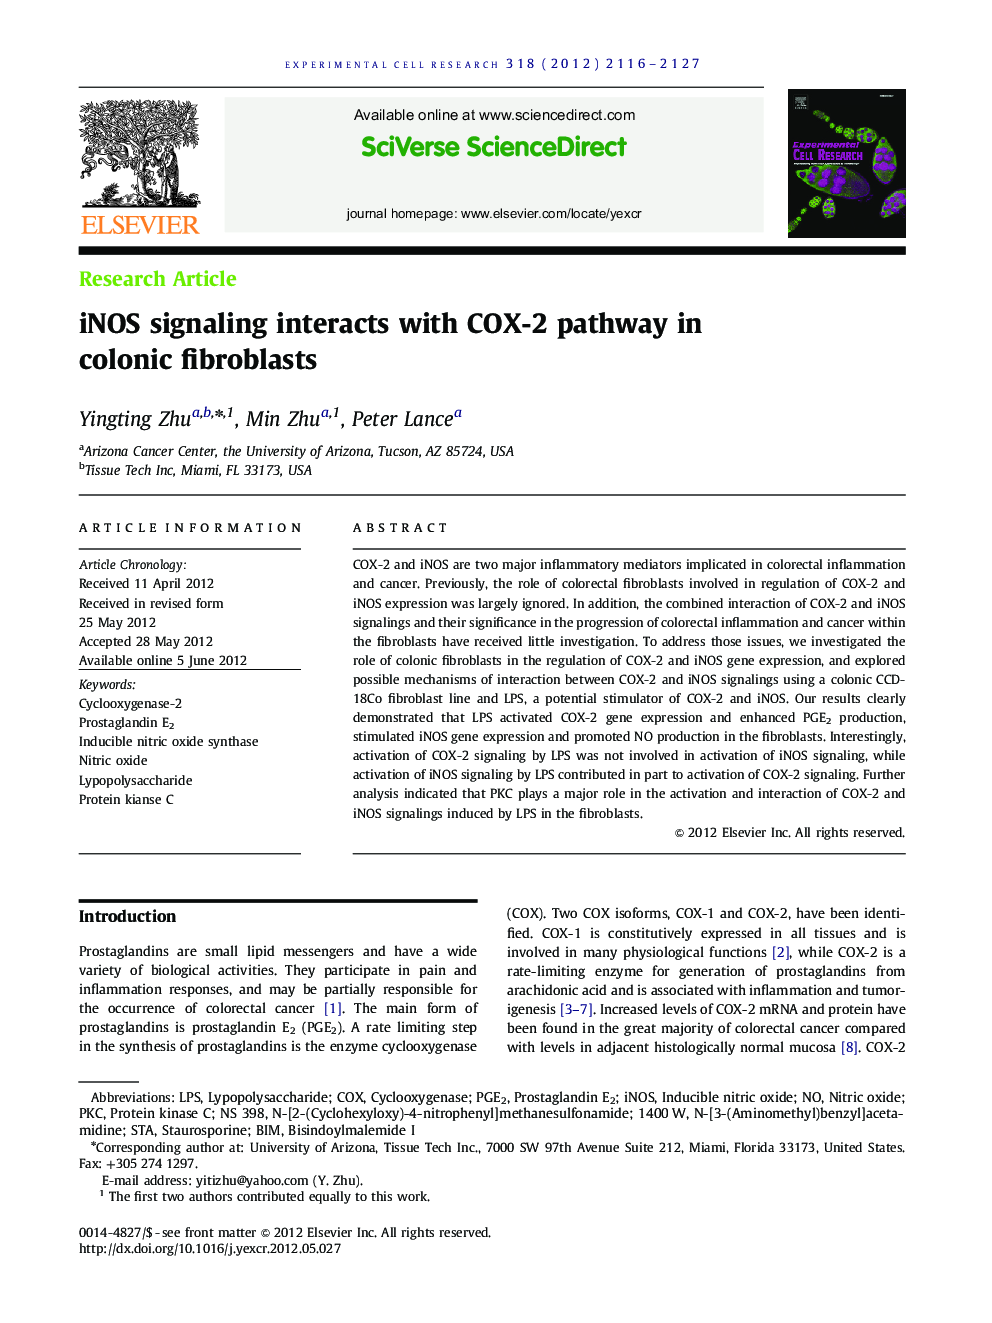 iNOS signaling interacts with COX-2 pathway in colonic fibroblasts